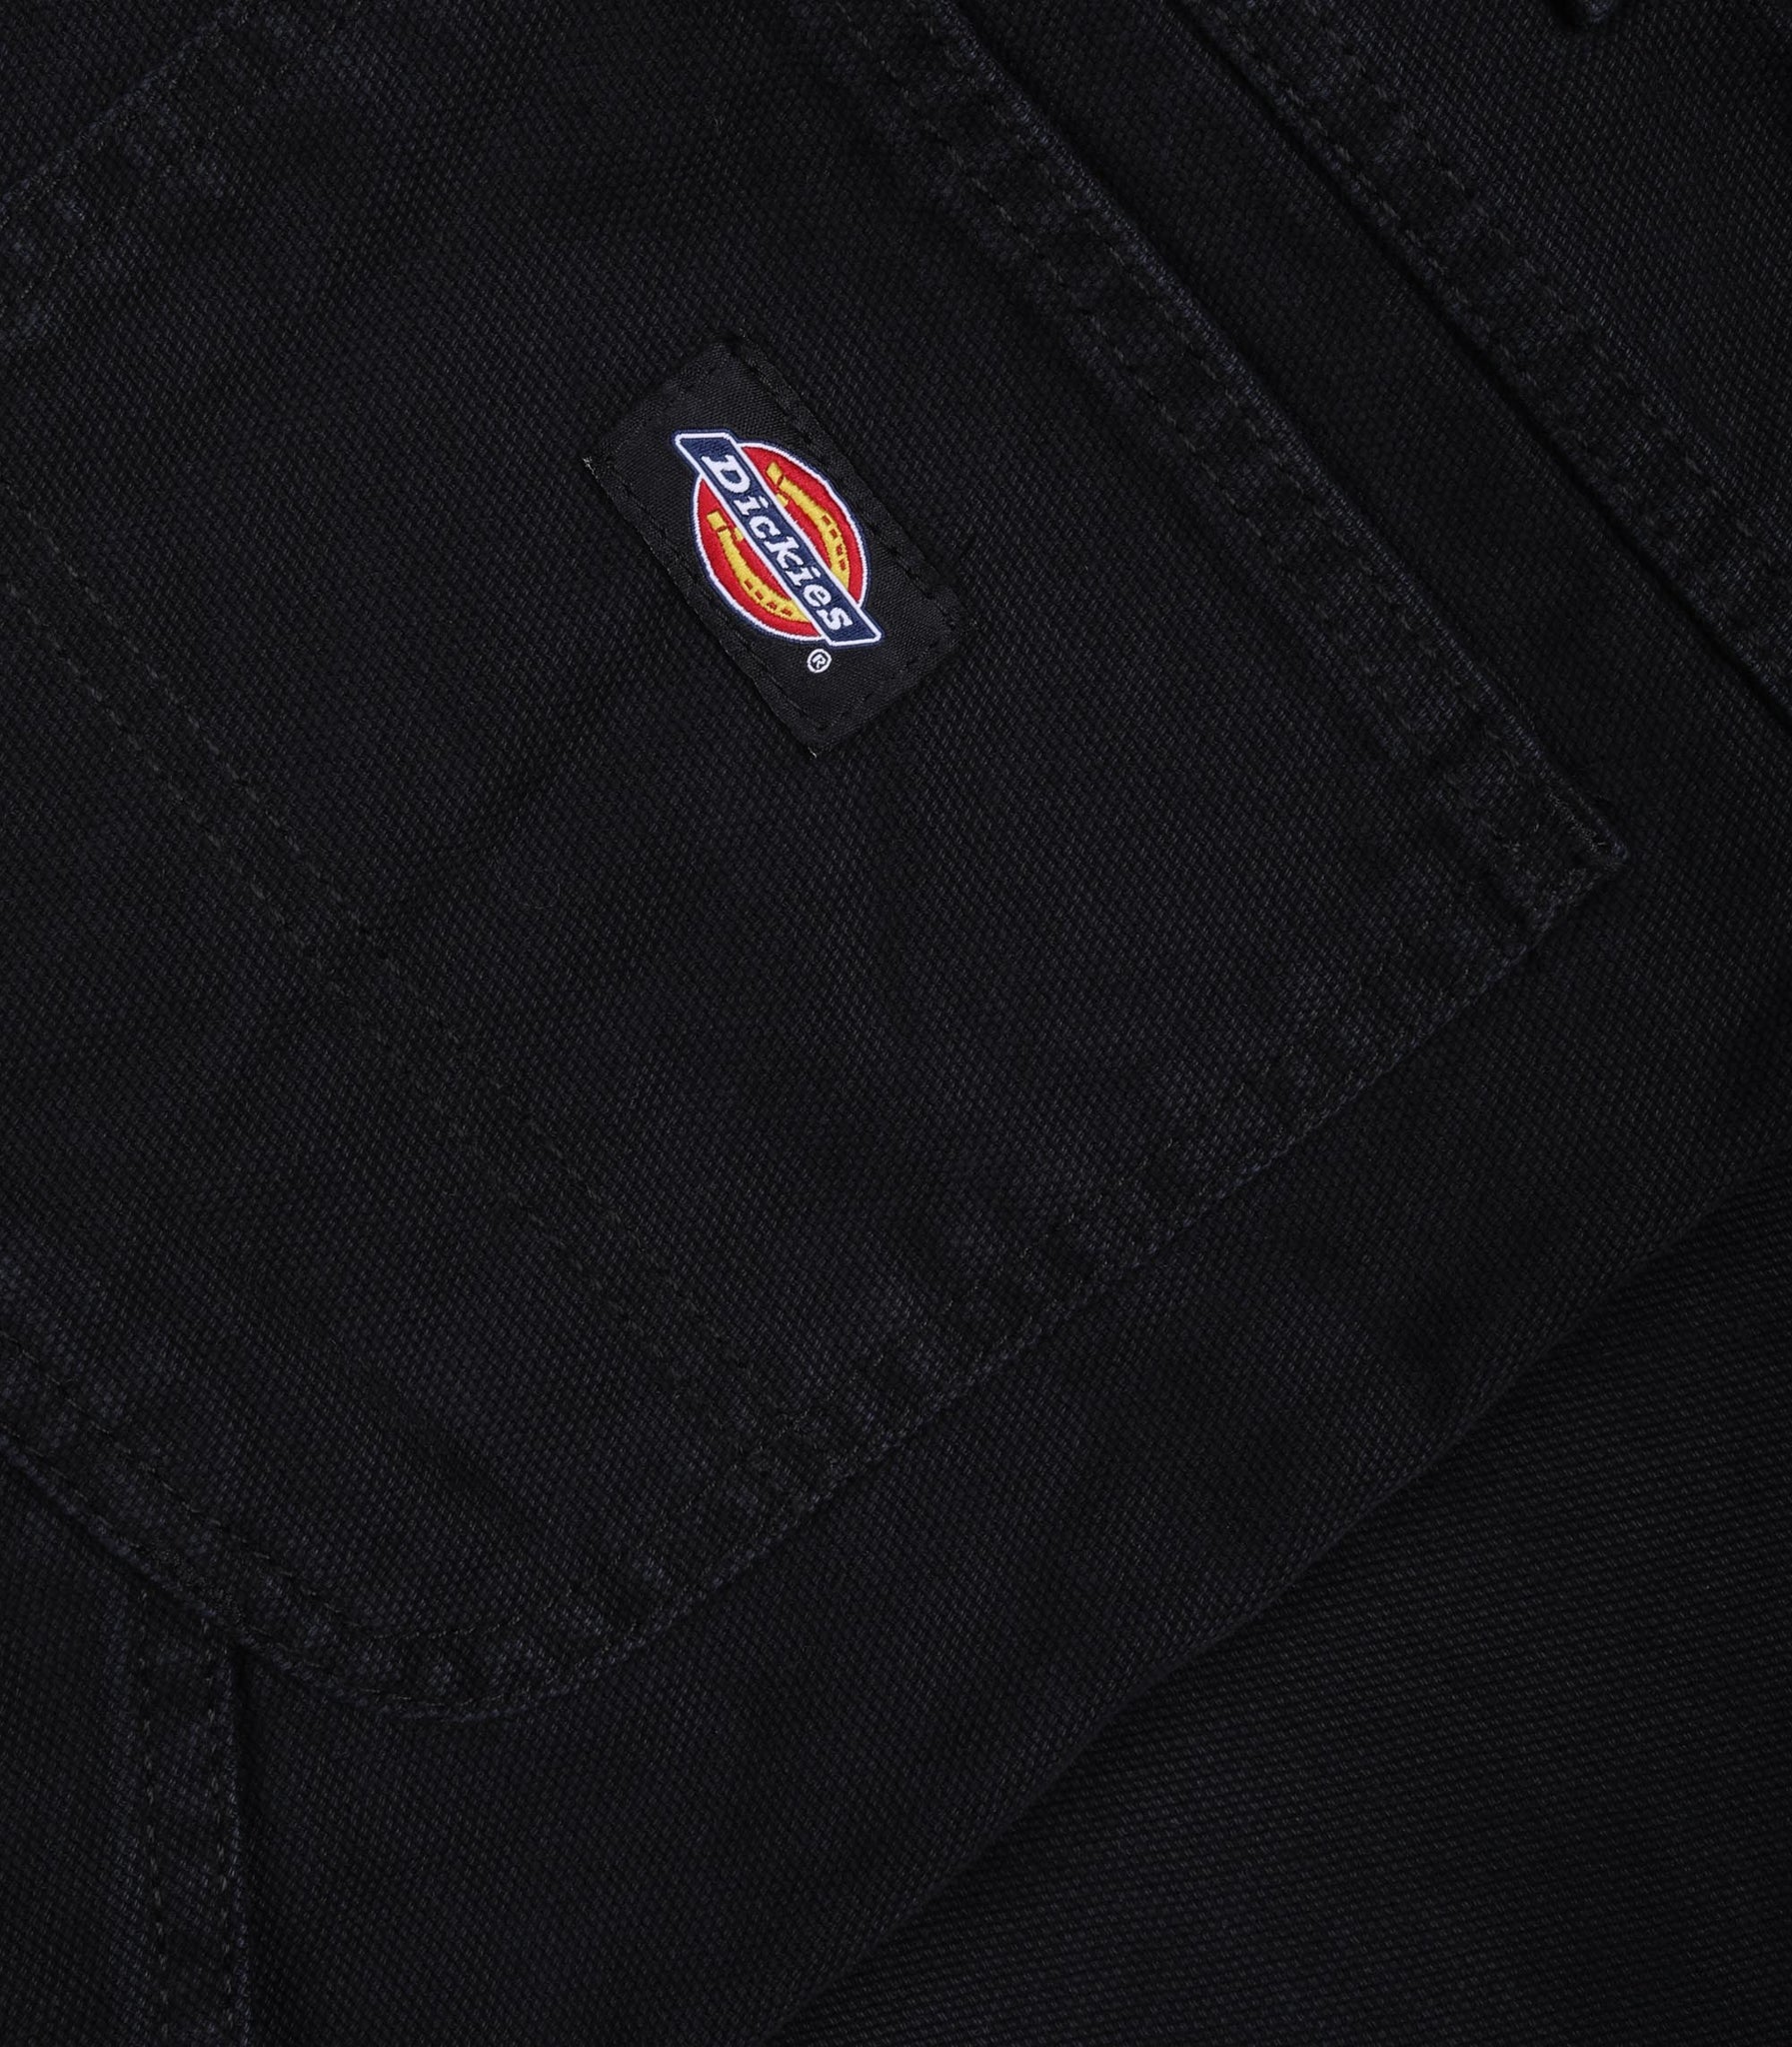 Dickies Duck Canvas Short Stone Washed Black